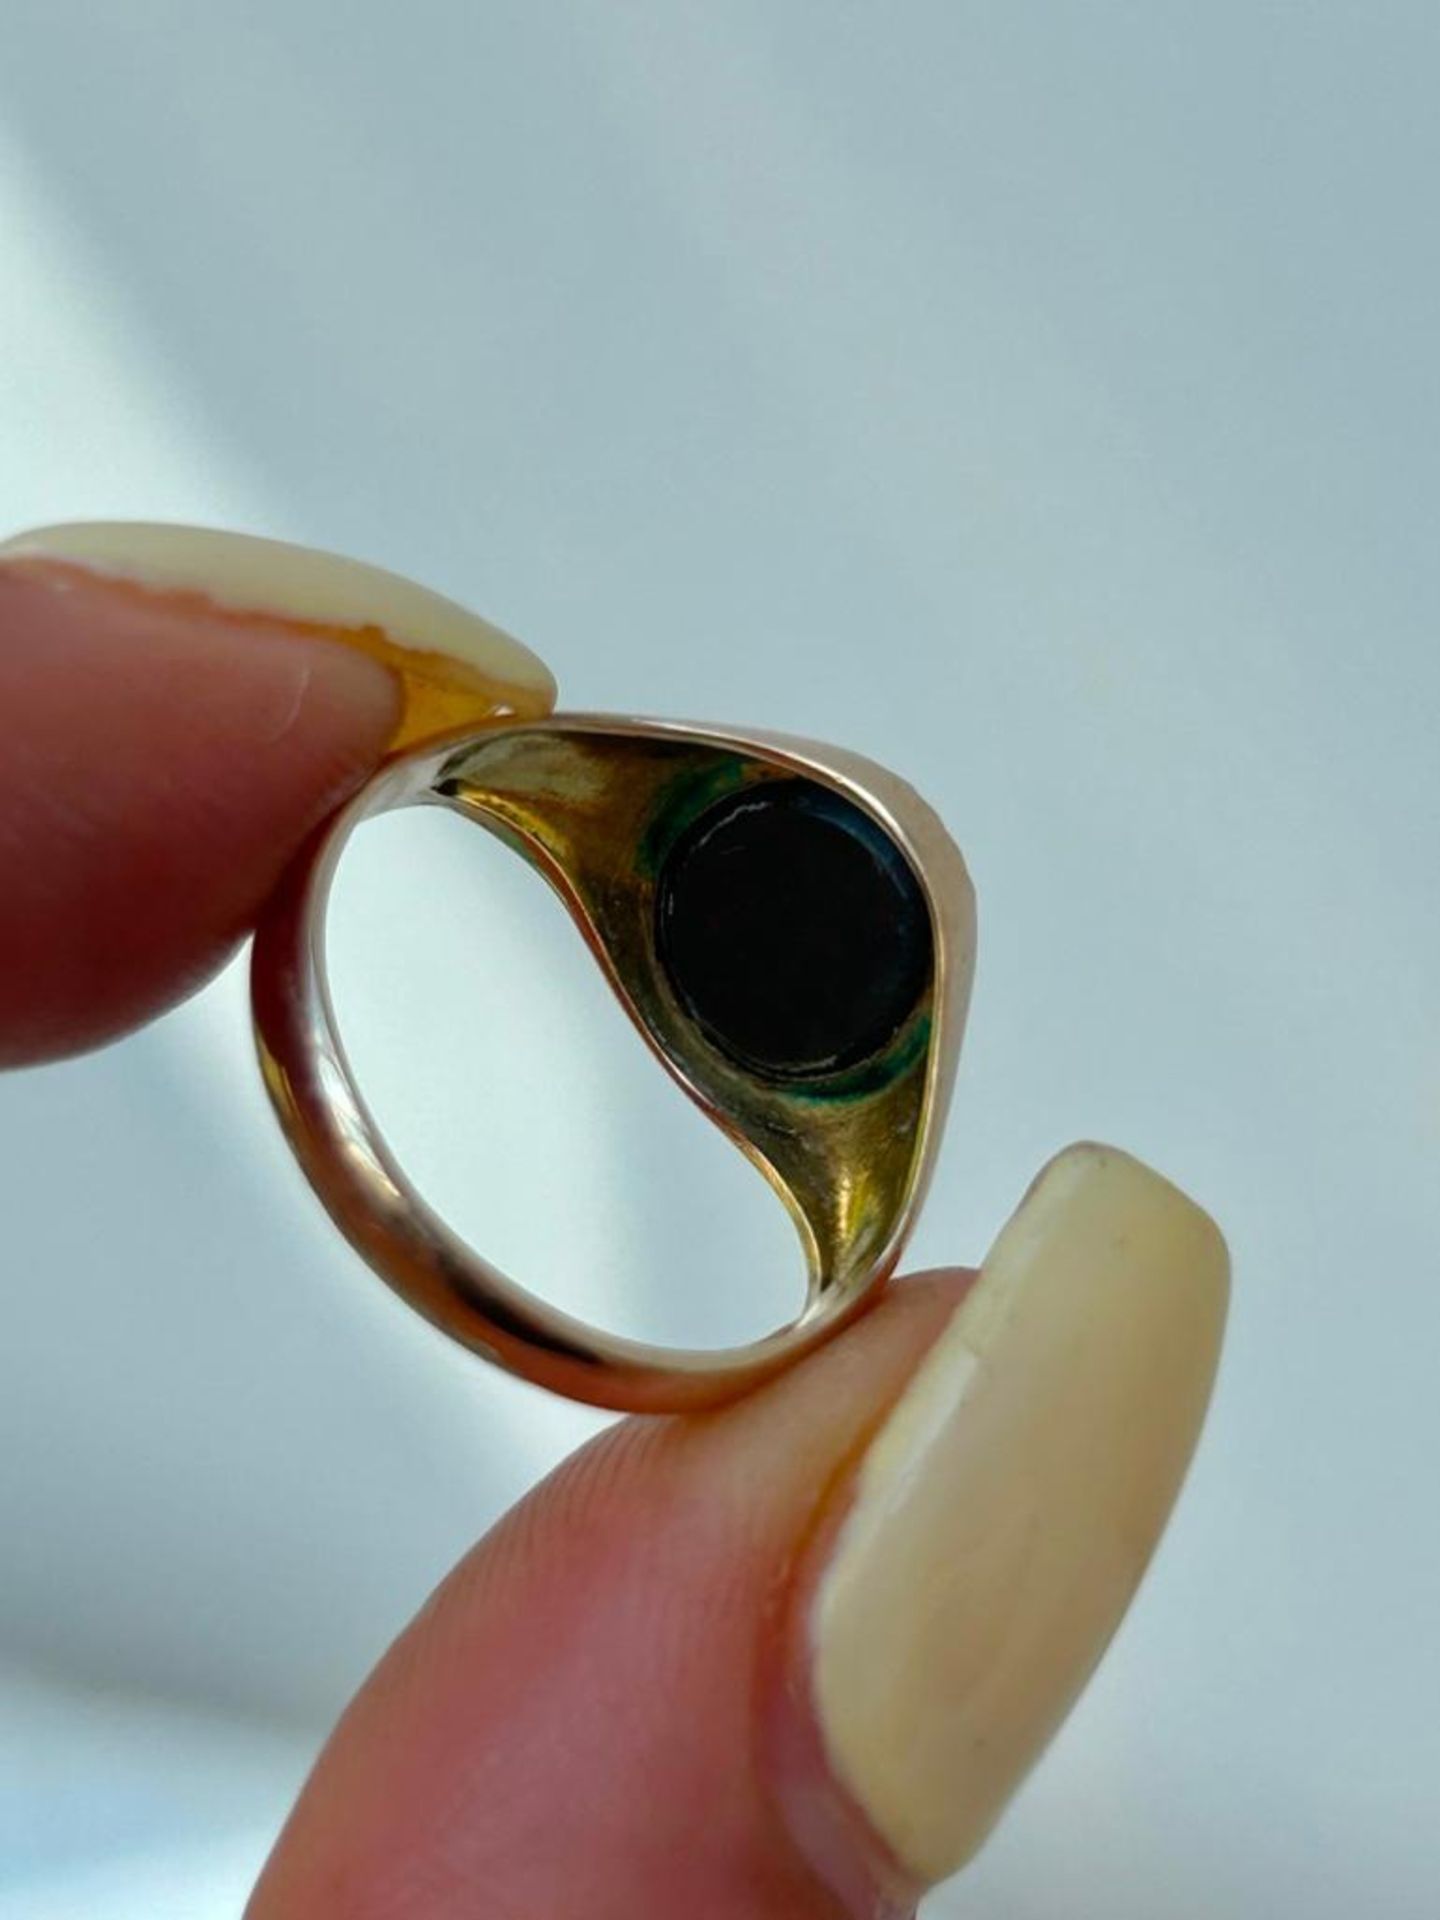 Vintage 9ct Yellow Gold and Onyx Signet Ring - Image 6 of 6